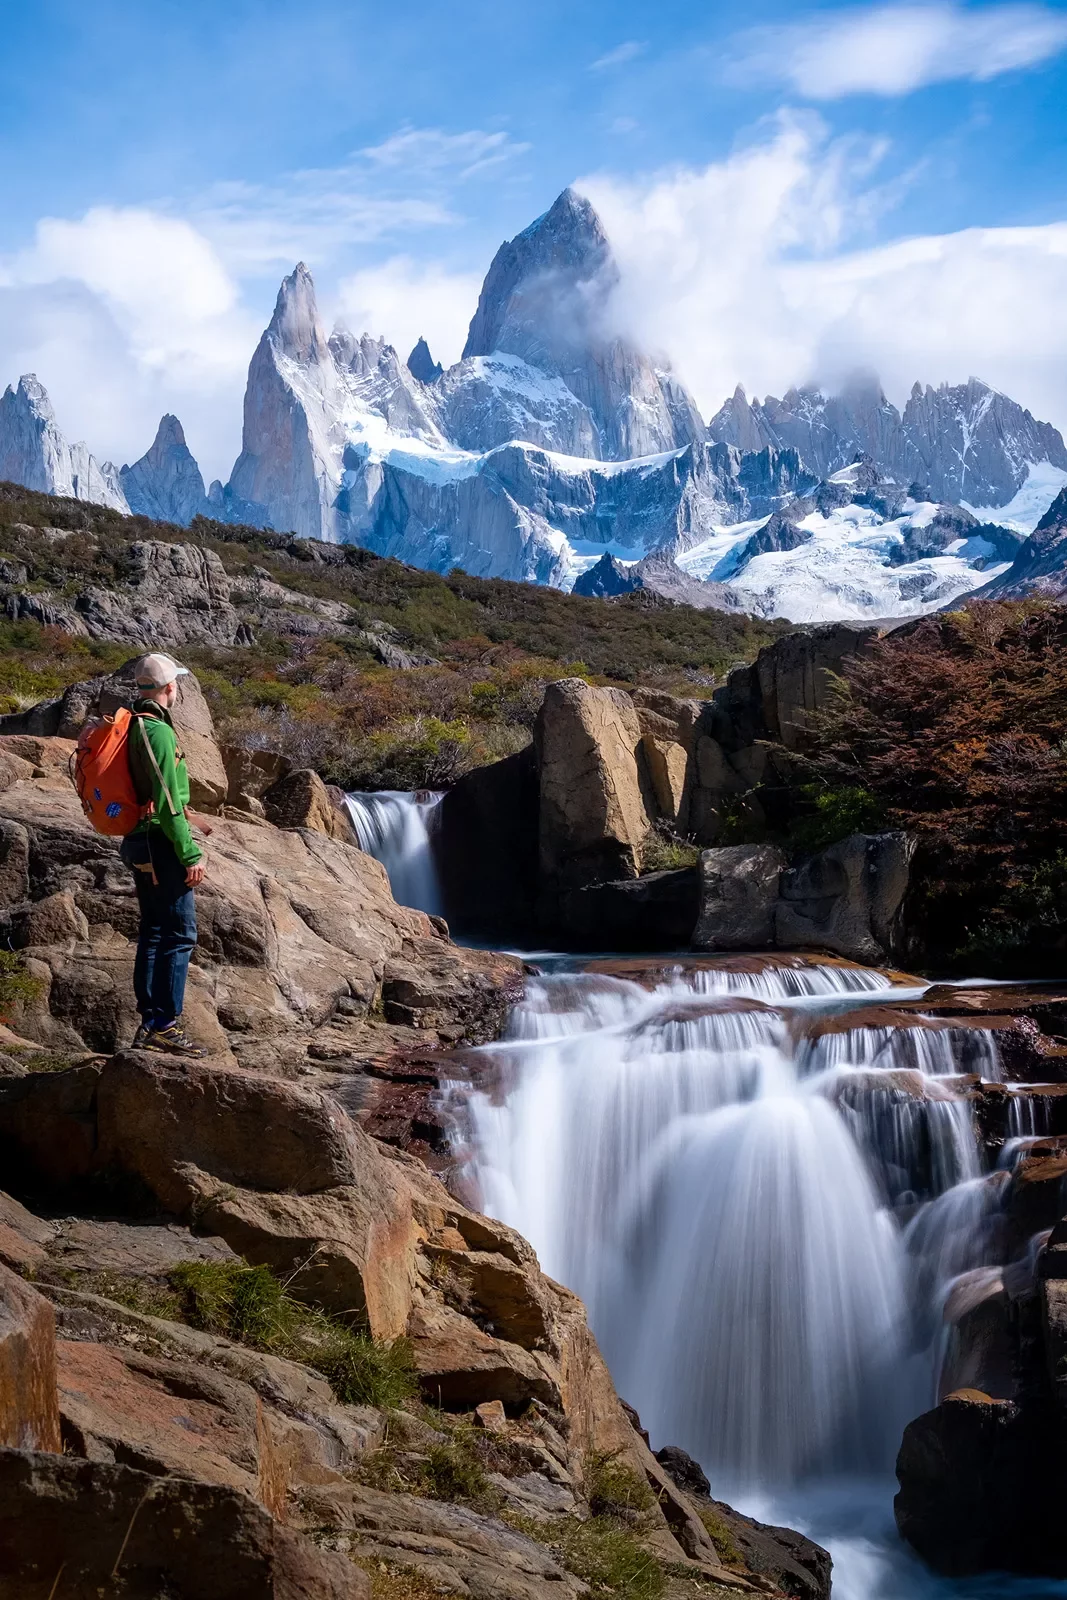 Guest standing next to flowing waterfall, sharp, snowy peaks in background.